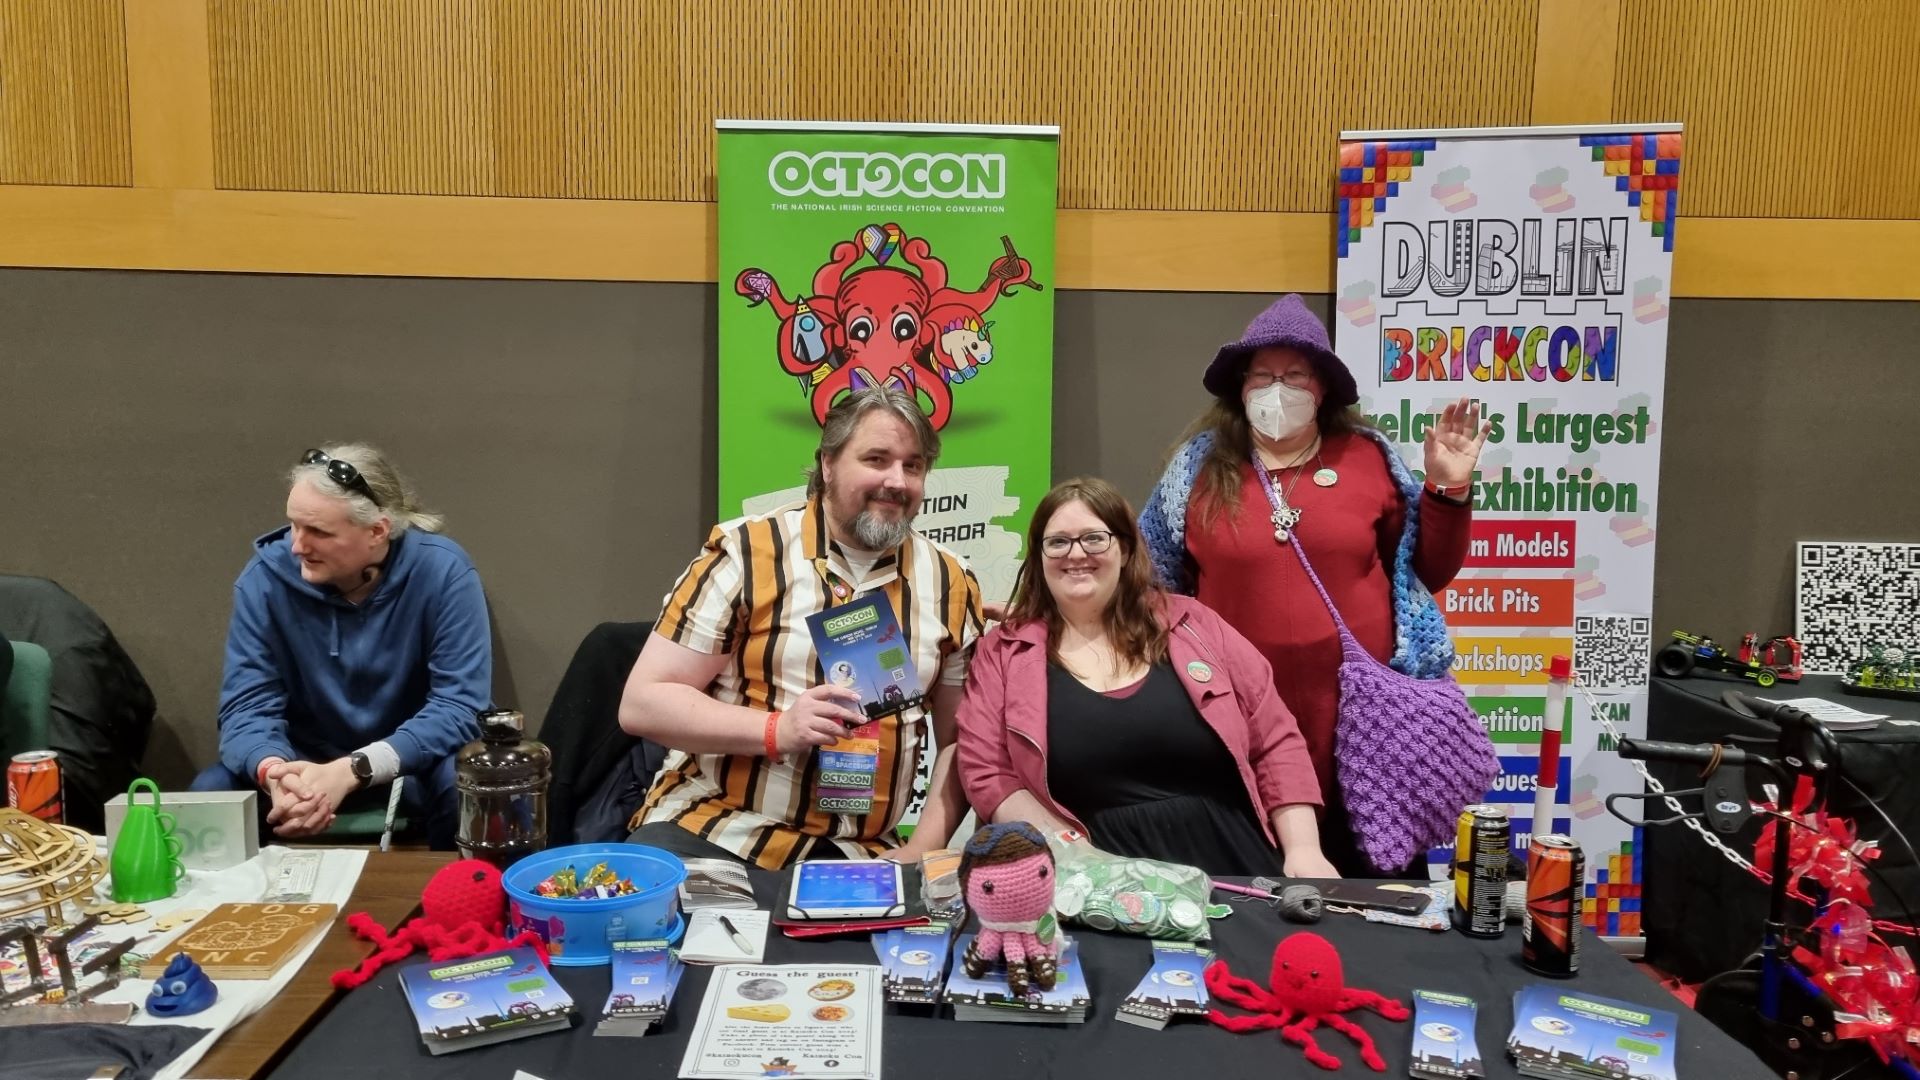 At the Octocon table: Declan, James, Kat, MaryBridgid and Octo are preparing for the panel